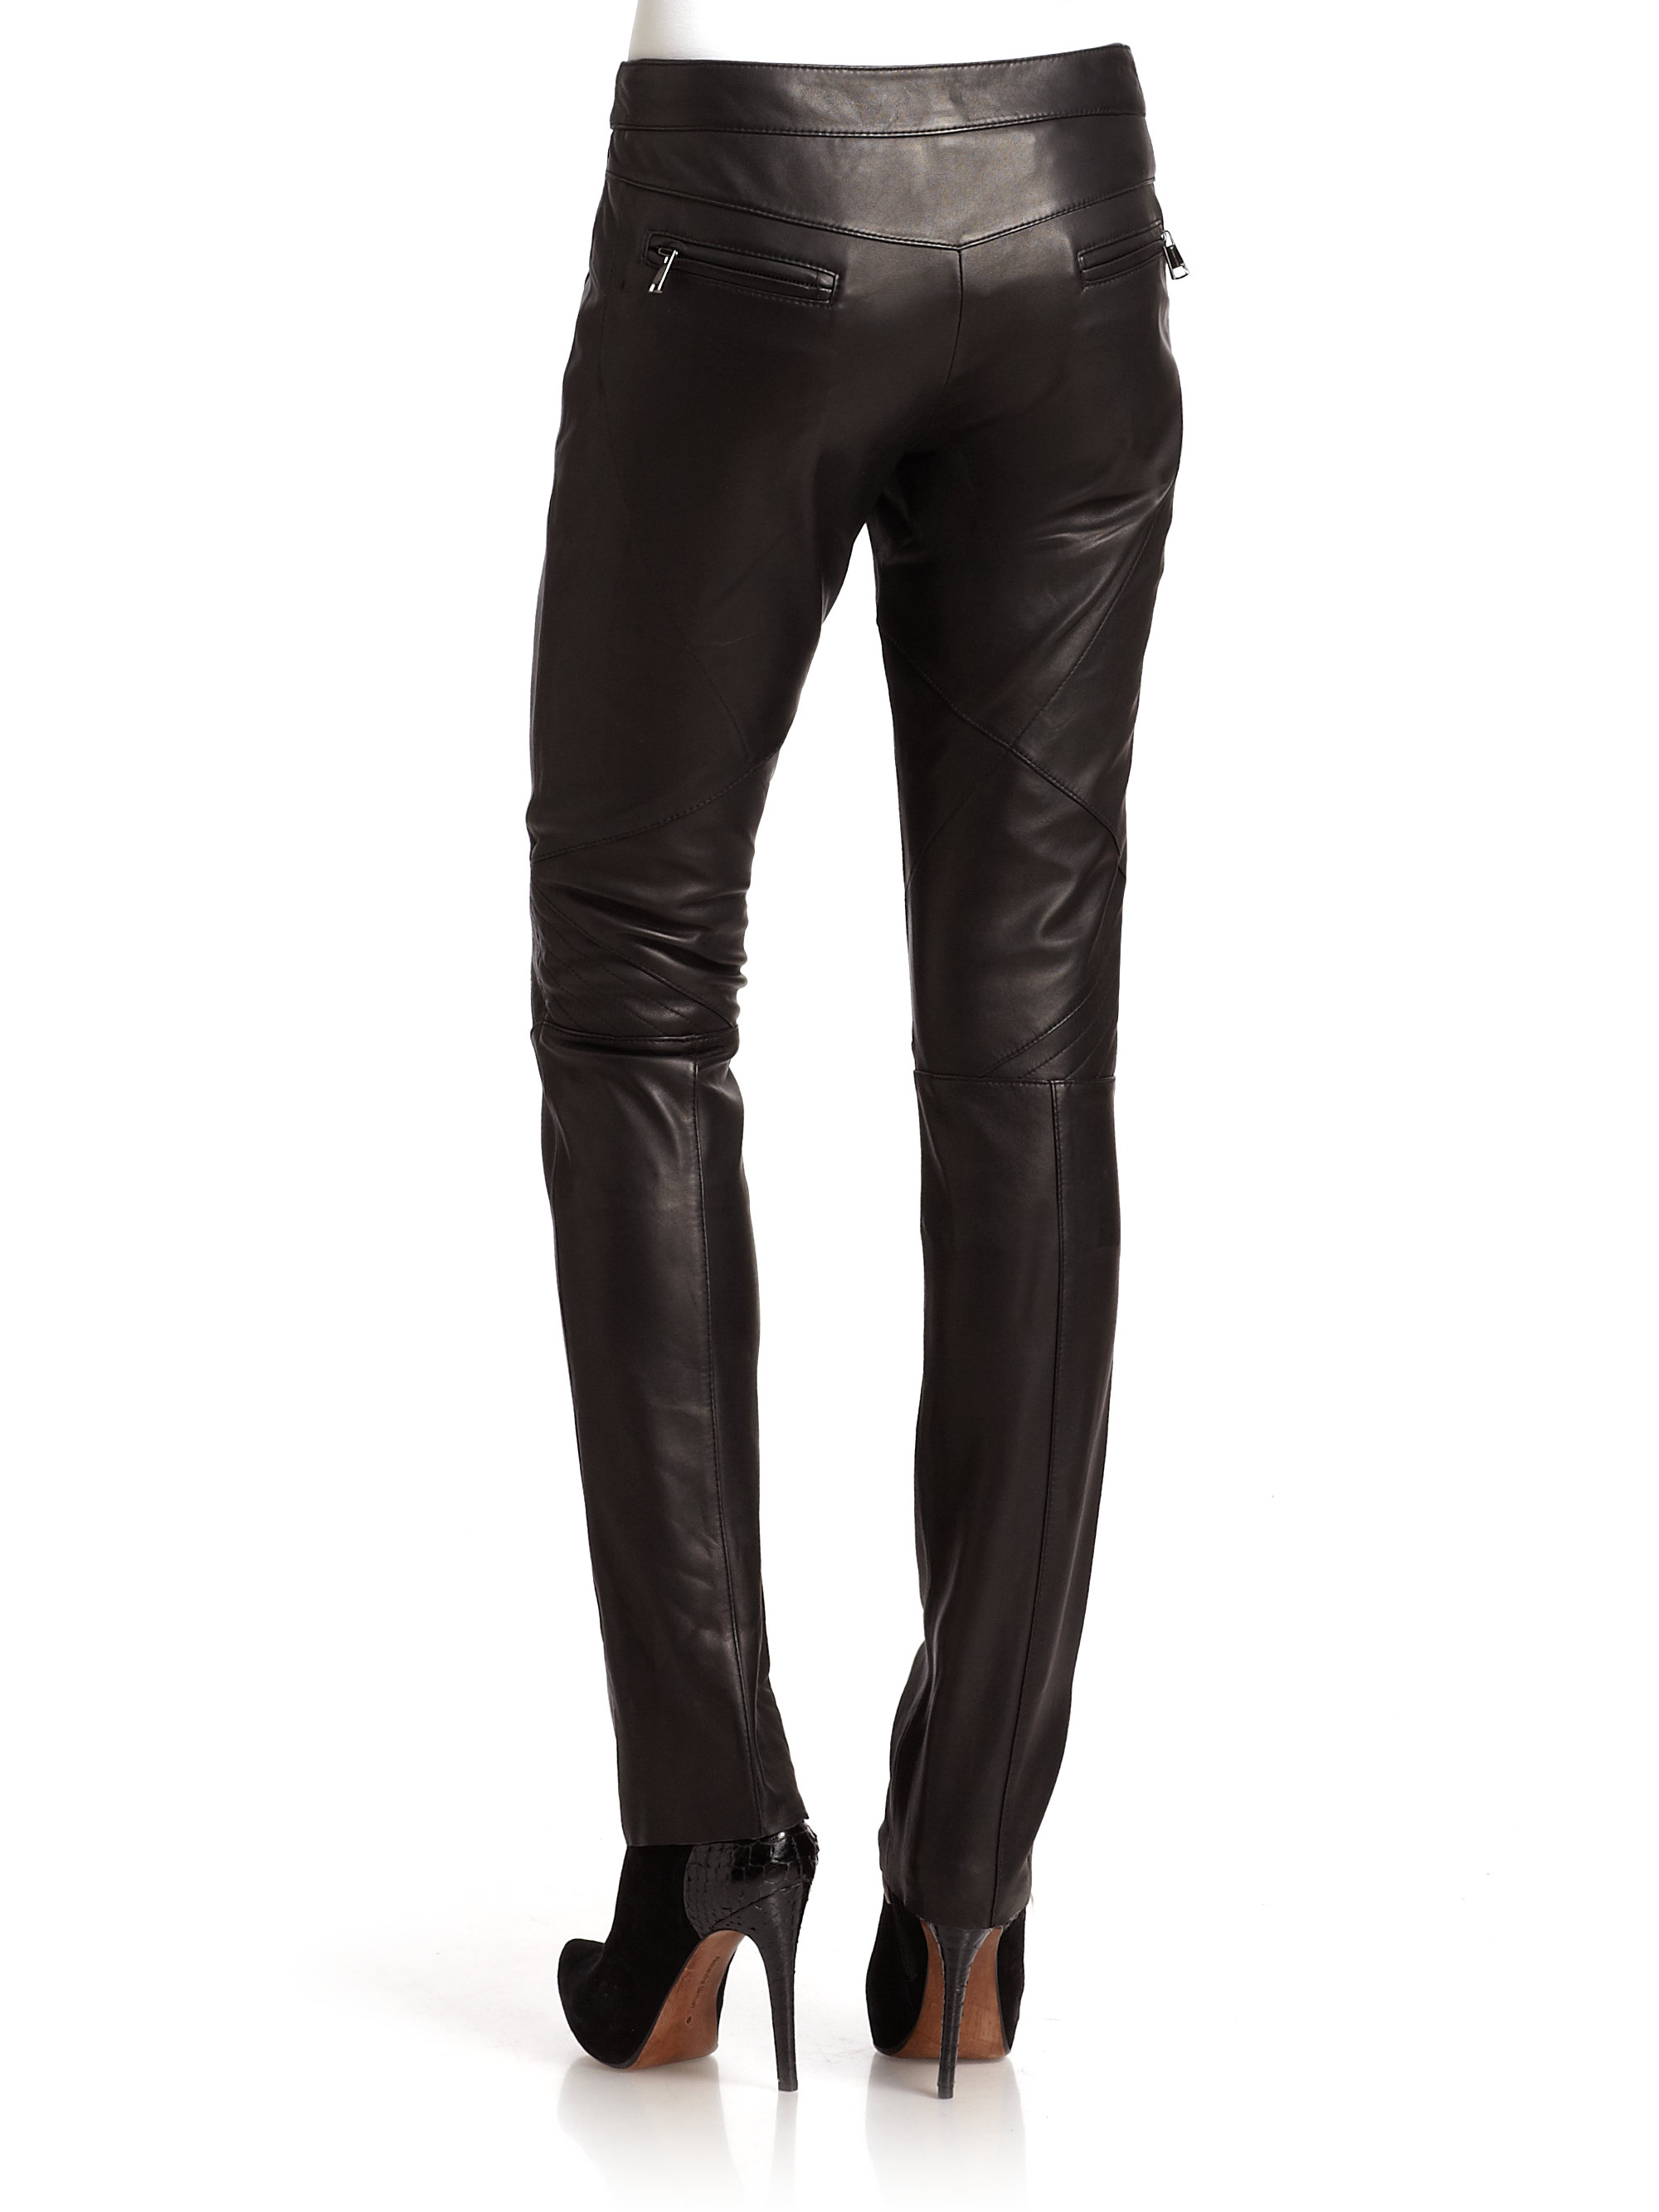 Andrew Marc Leather Pants in Black - Lyst